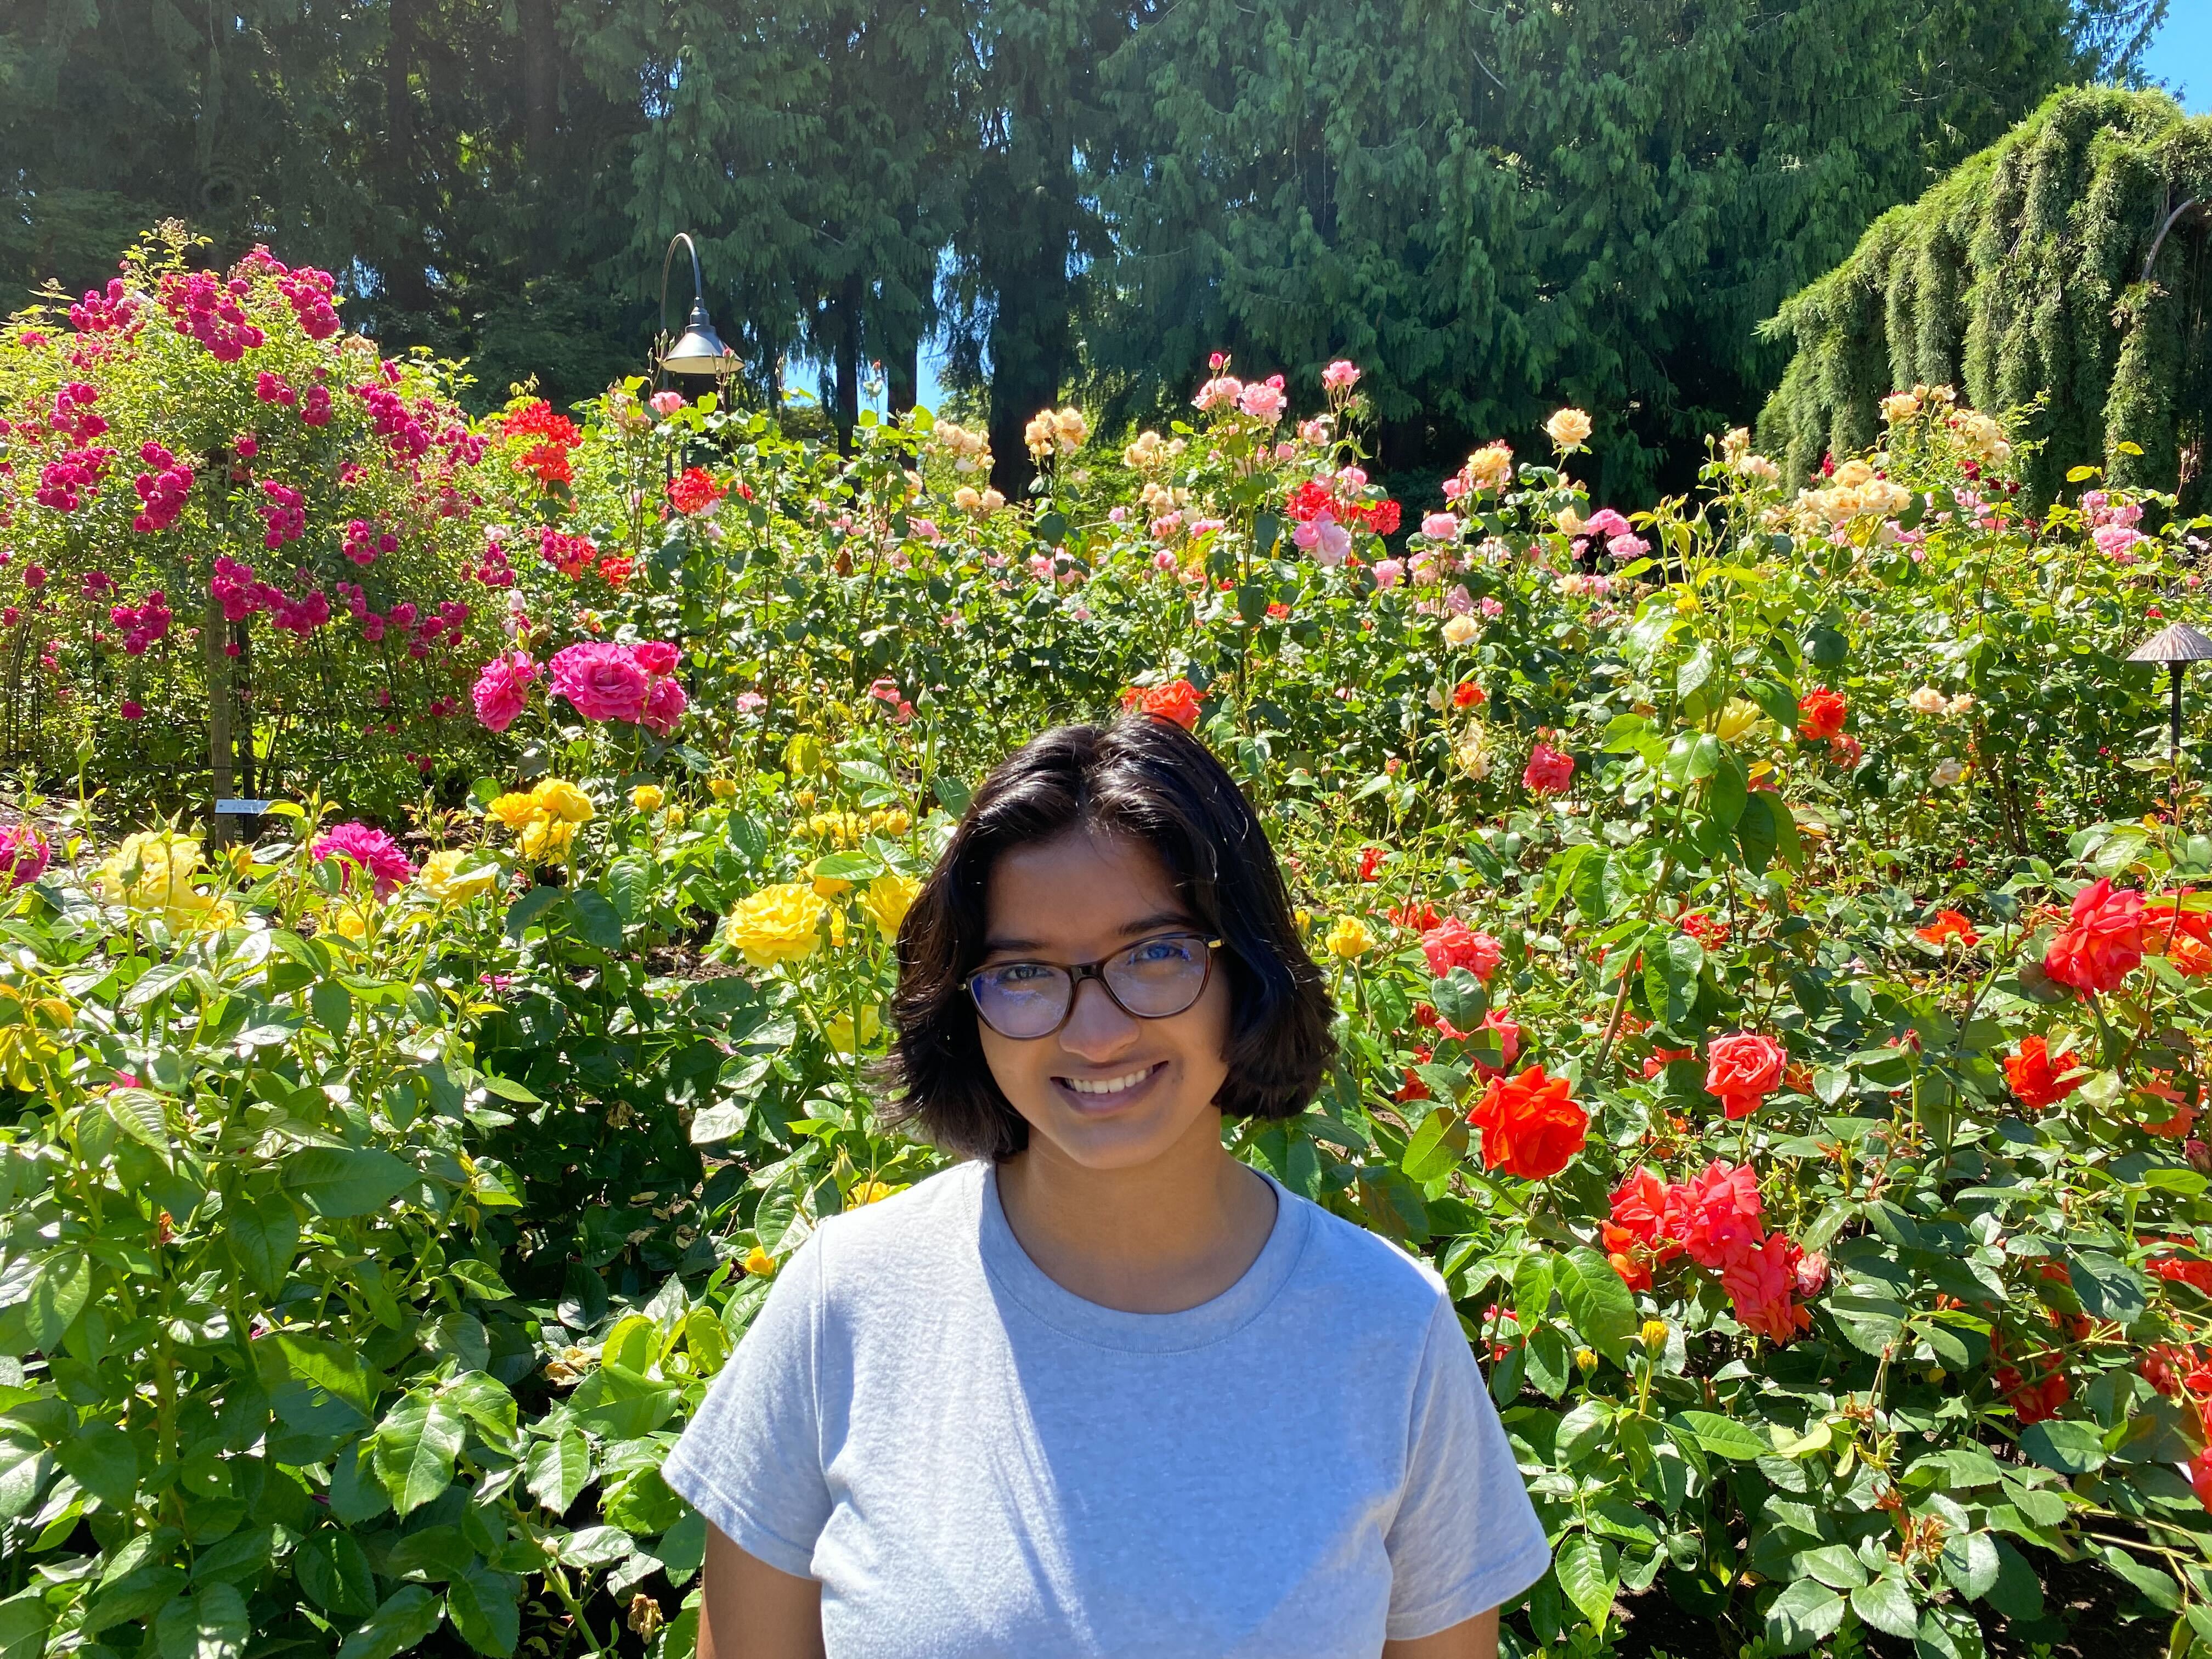 An Indian woman with short hair wearing a grey shirt is standing in front of flowers